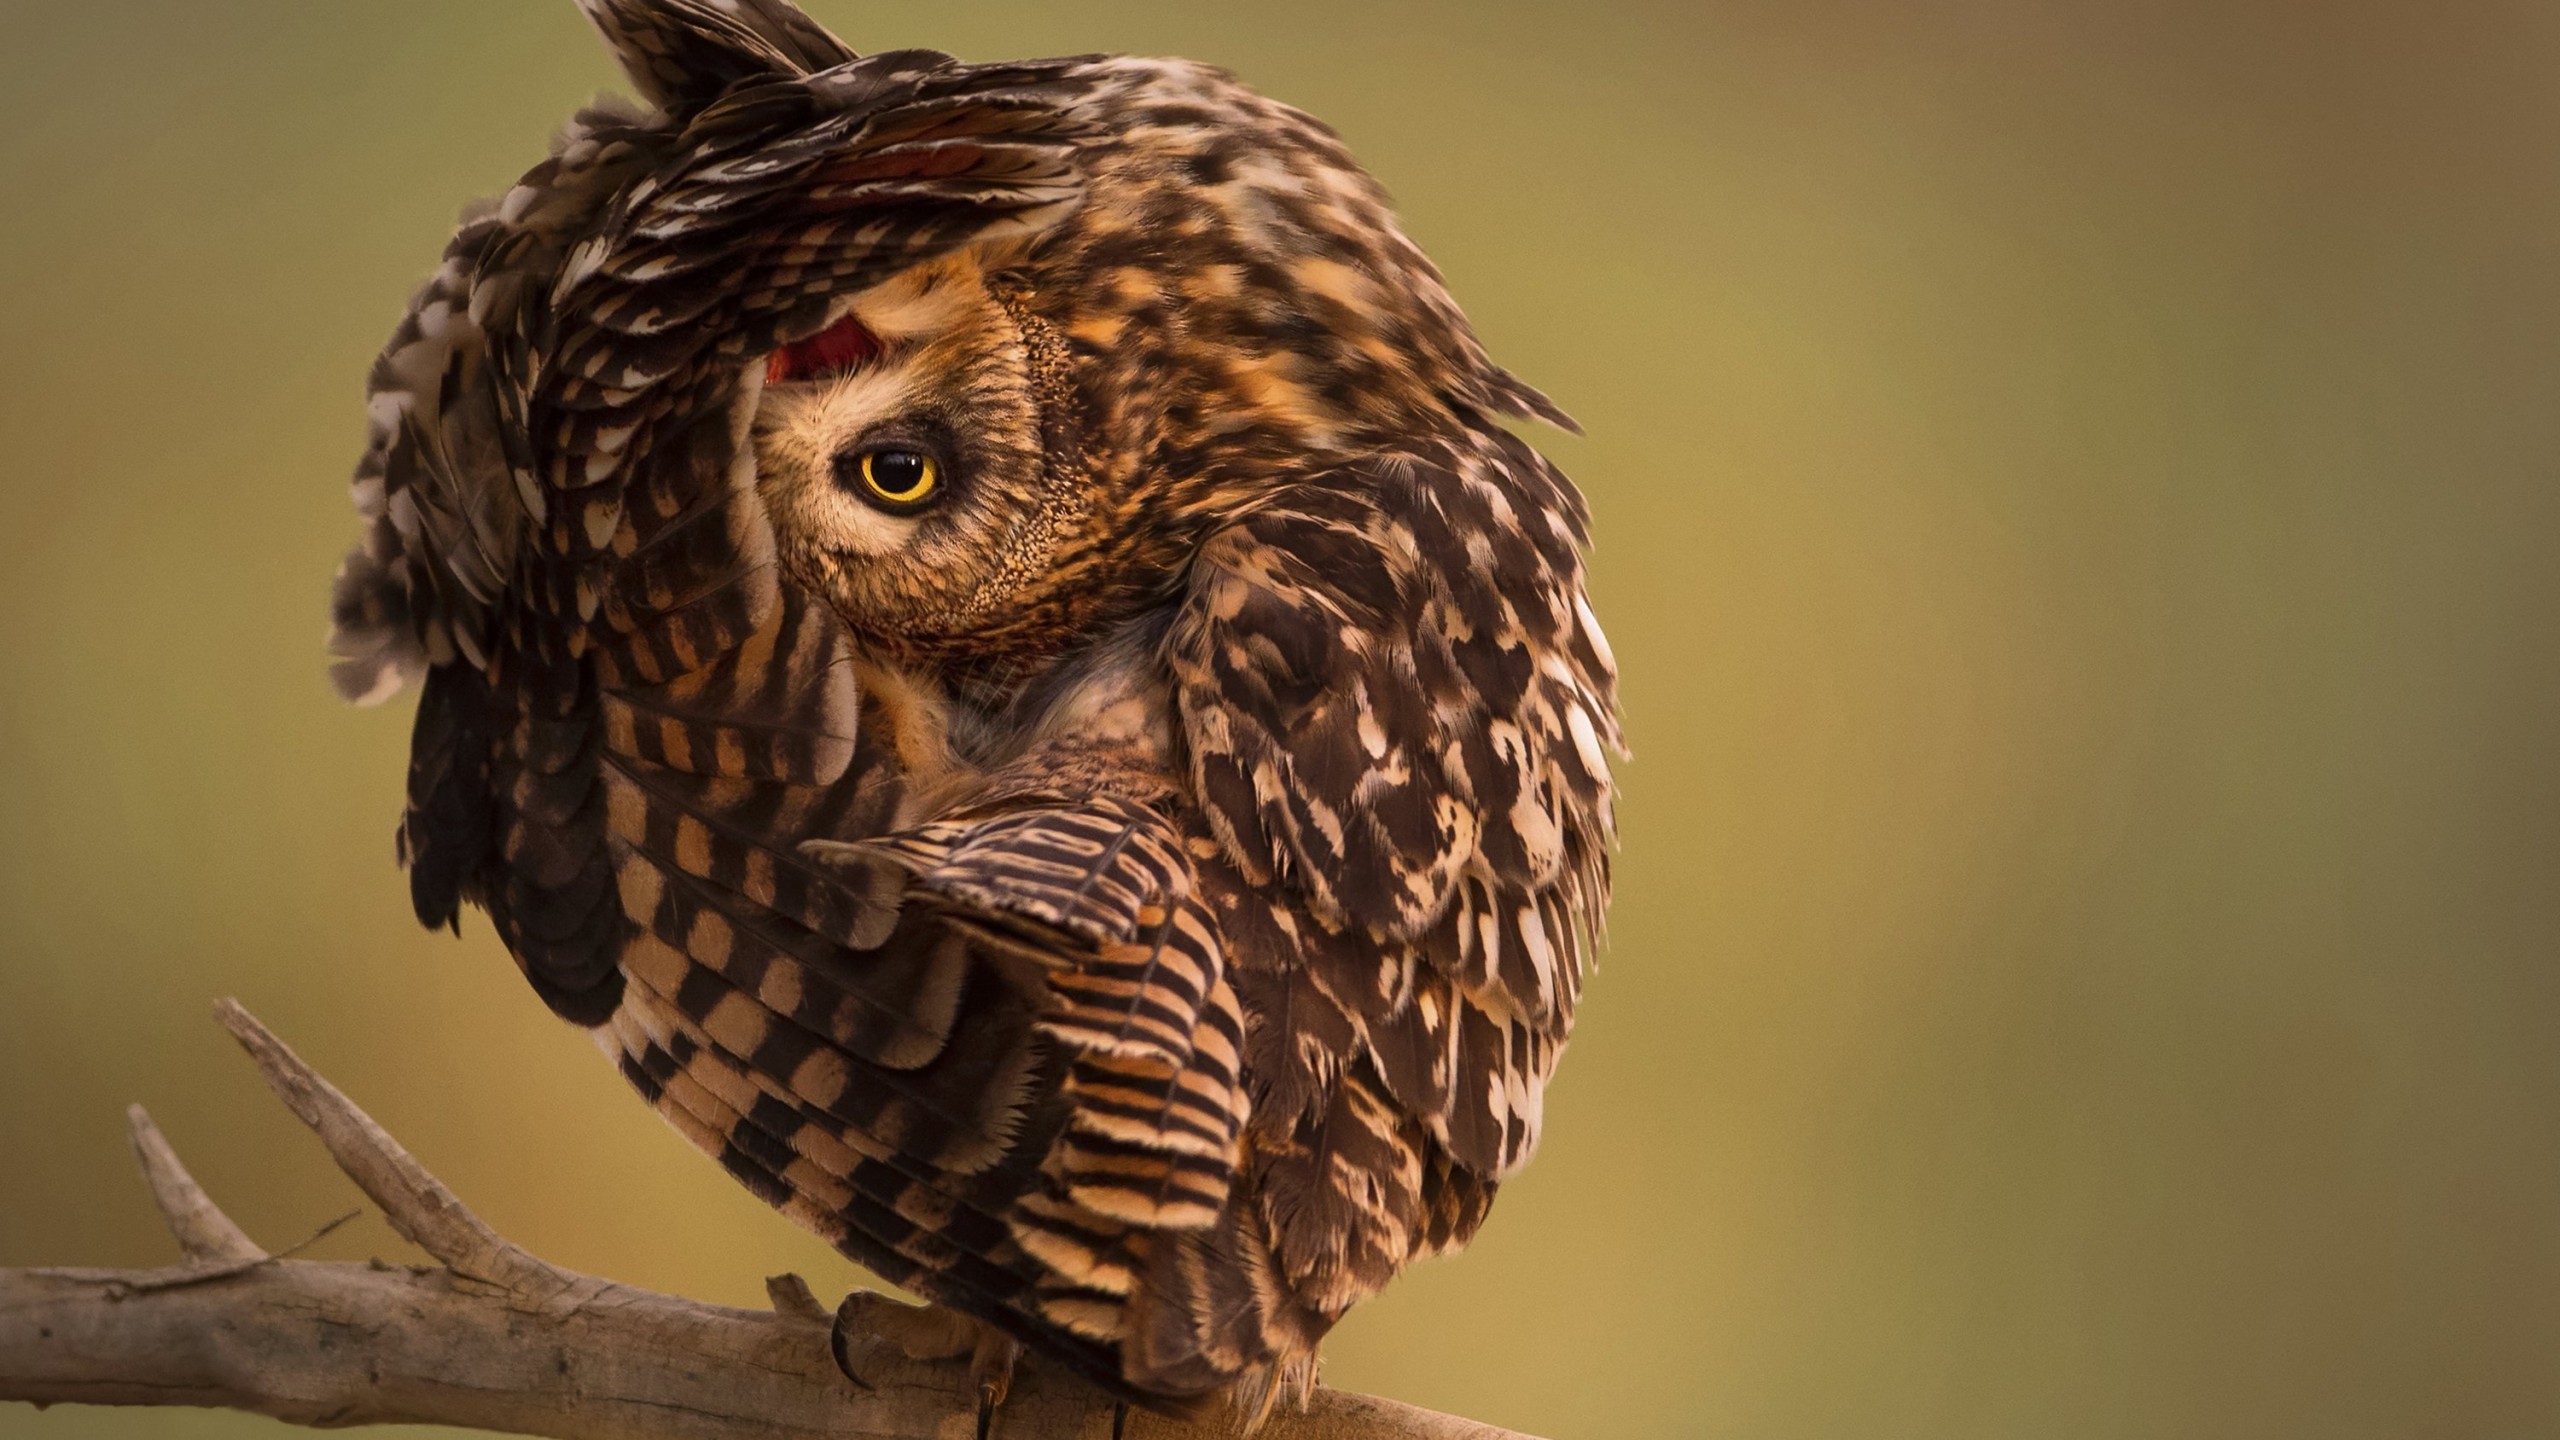 Wallpaper National Geographic 4k HD Owl Funny Os